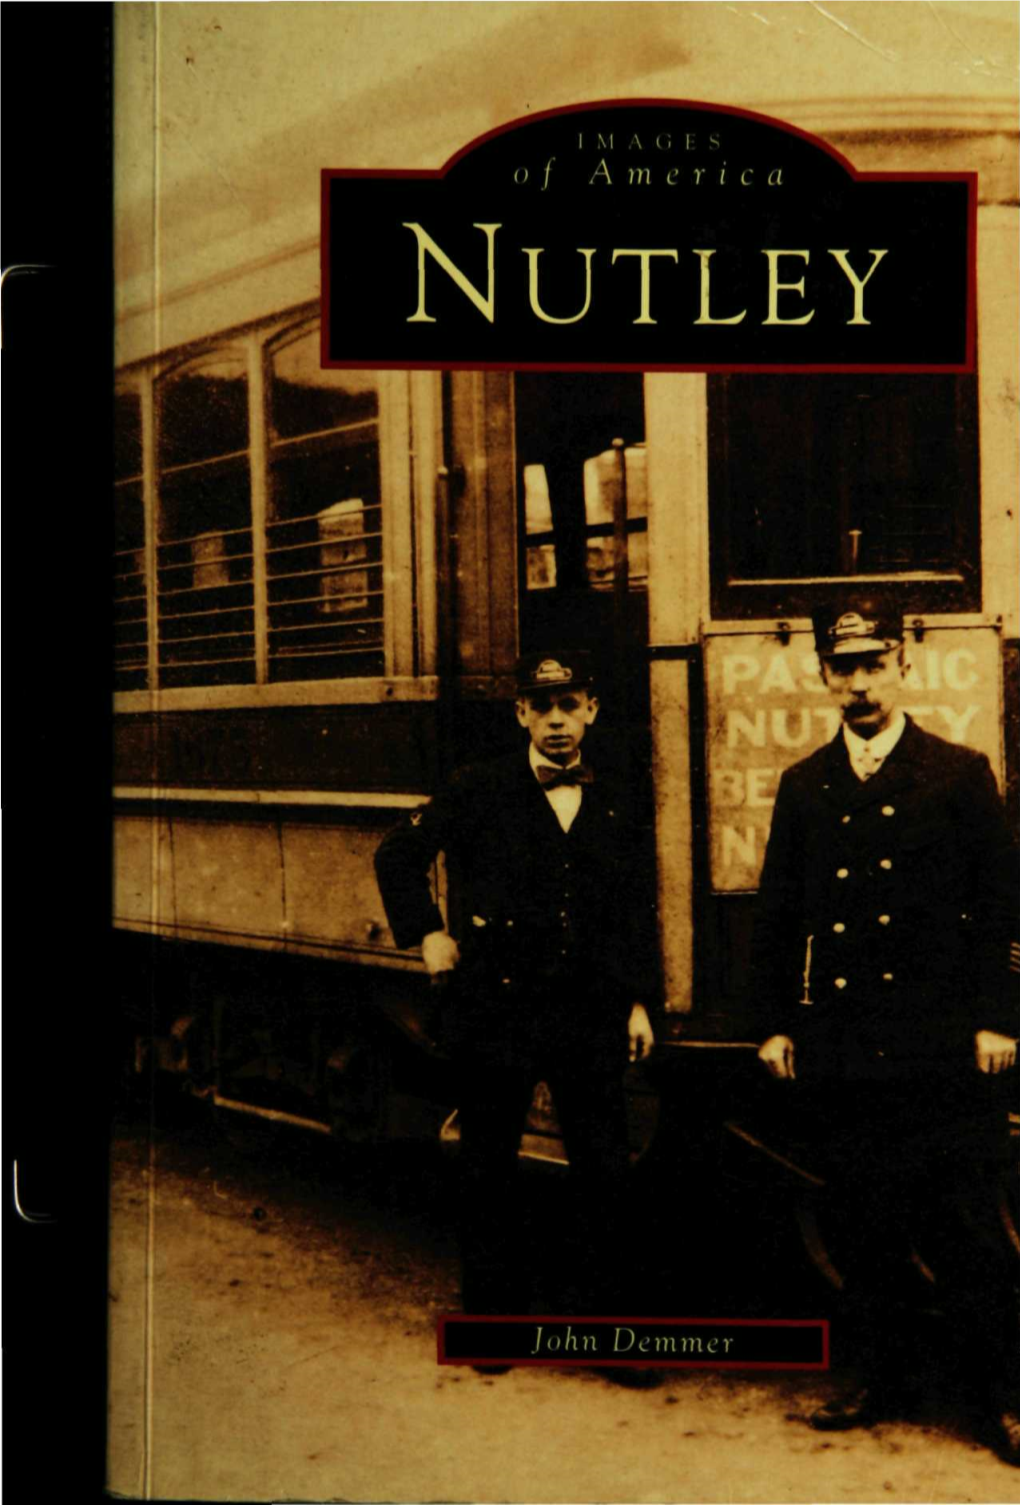 IMAGES of America NUTLEY